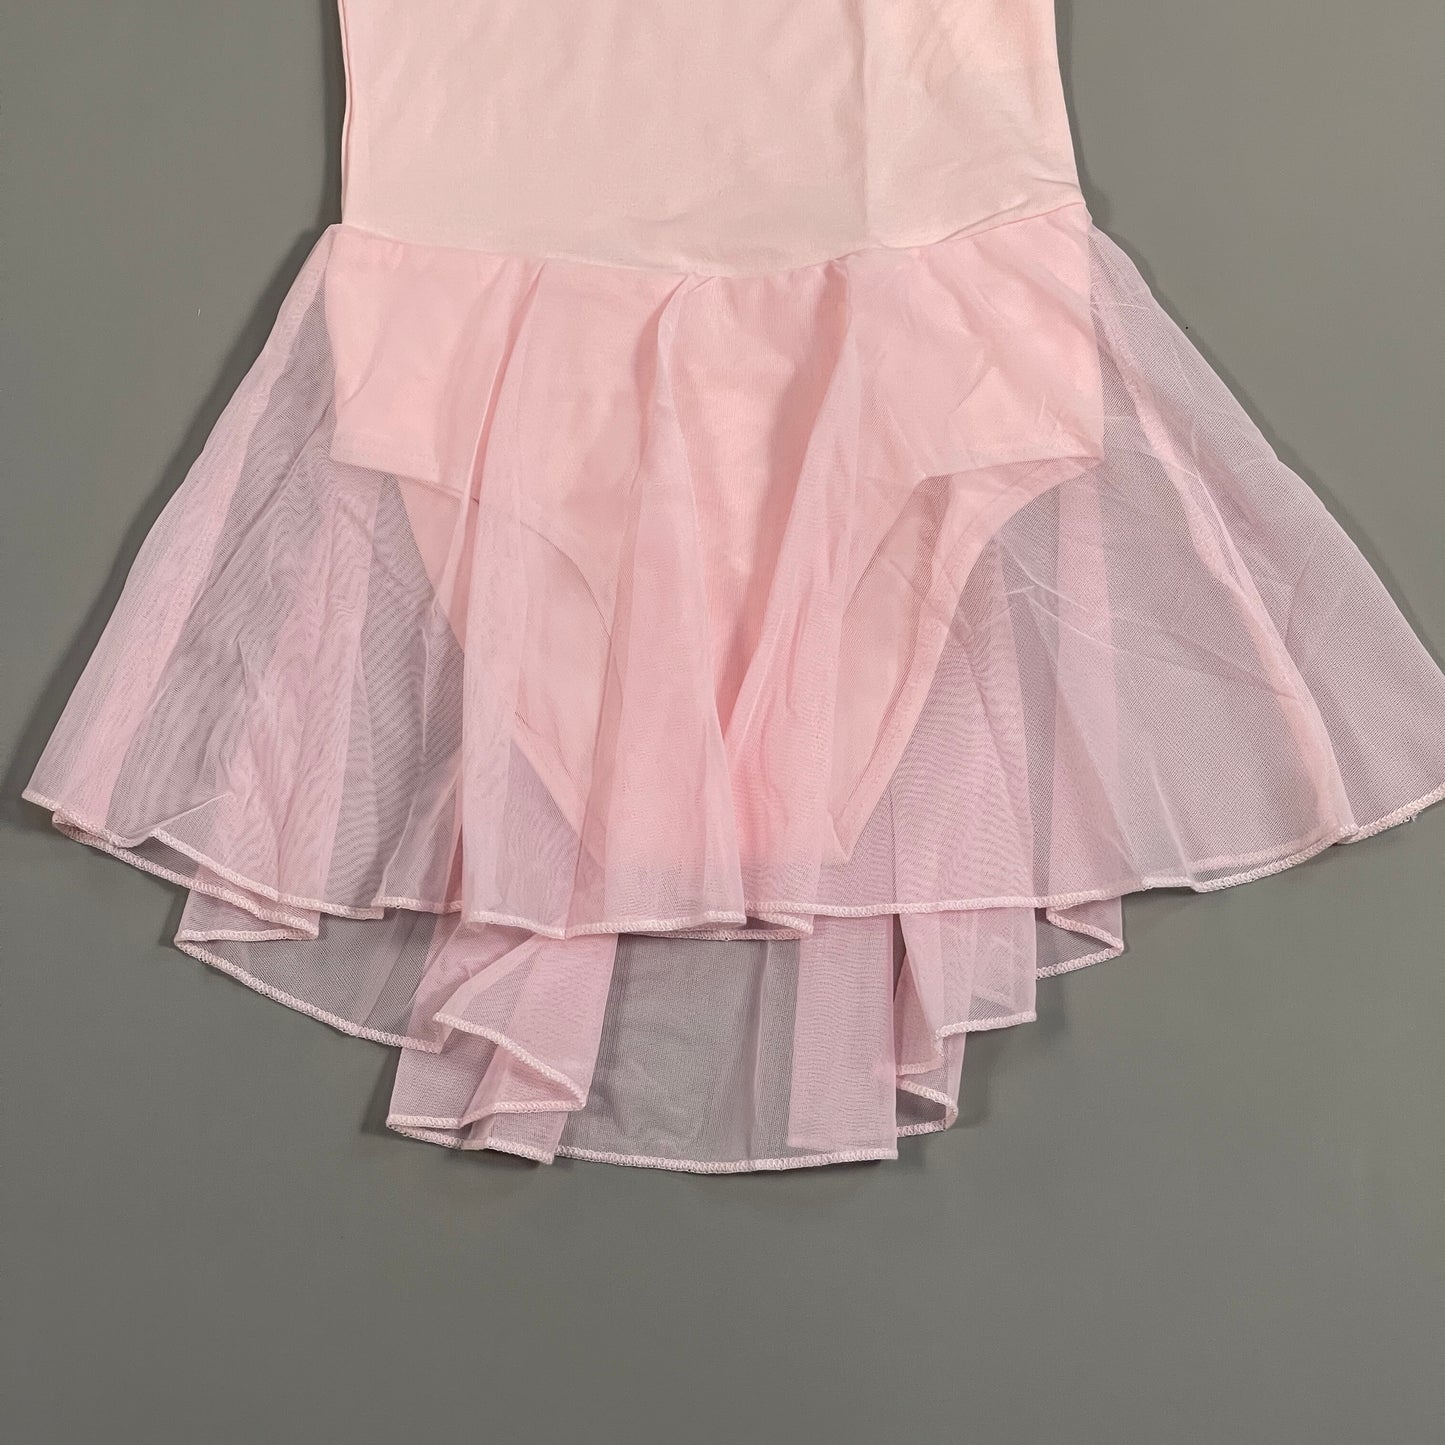 MDNMD Toddler Girls Ballet, Dance, Gymnastic, Leotard Flutter Sleeve Outfit With Skirt Sz 5 Pink (New)